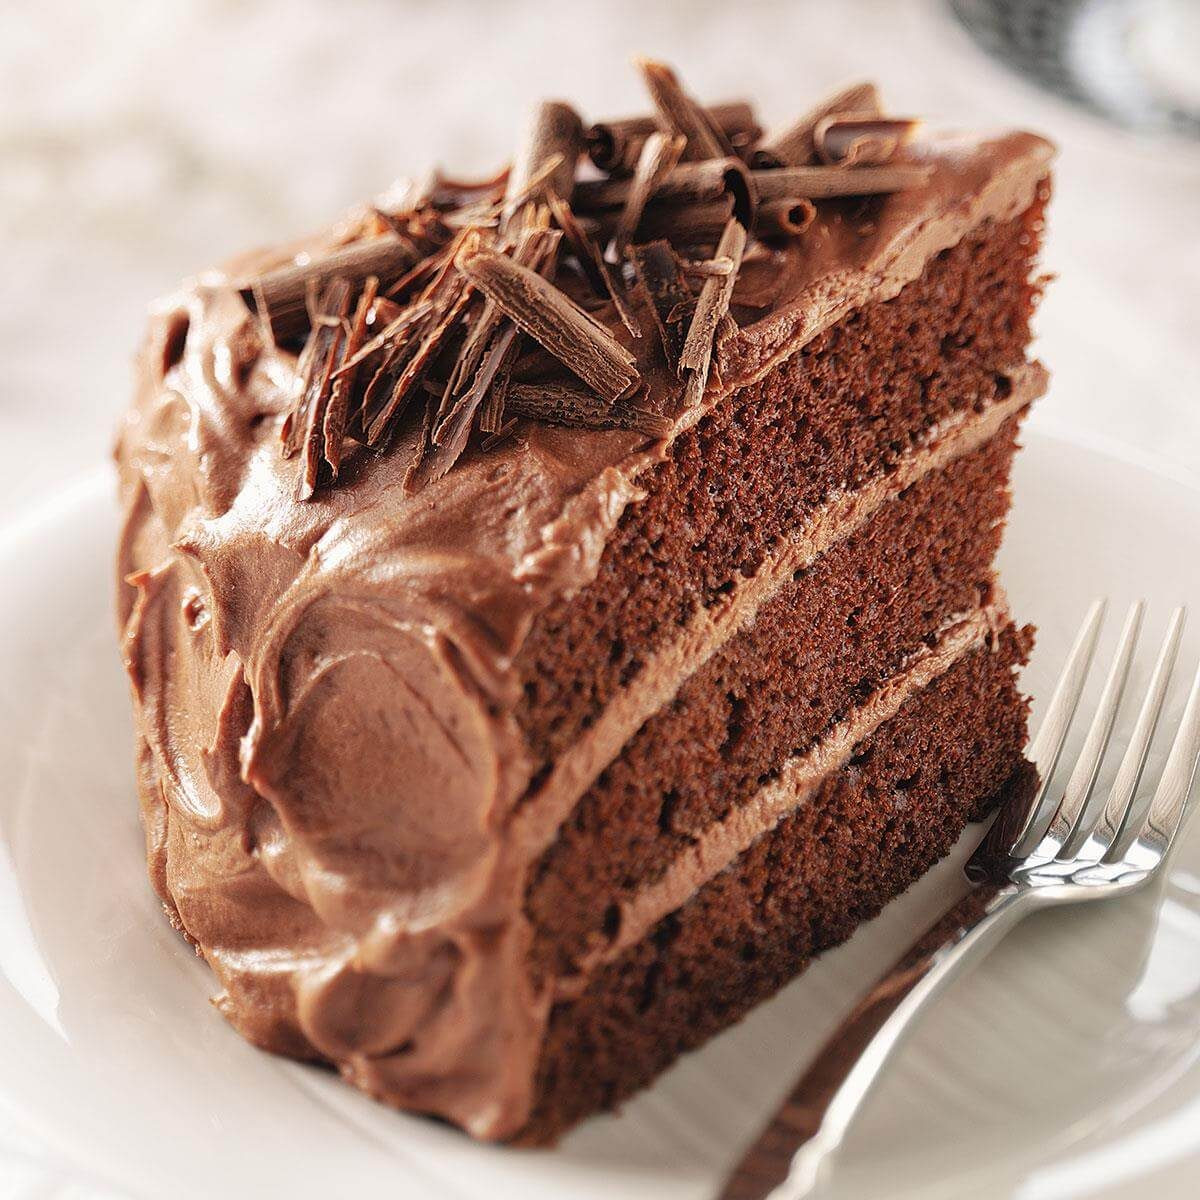 Best Frosting For Chocolate Cake
 Best Chocolate Cake Recipe